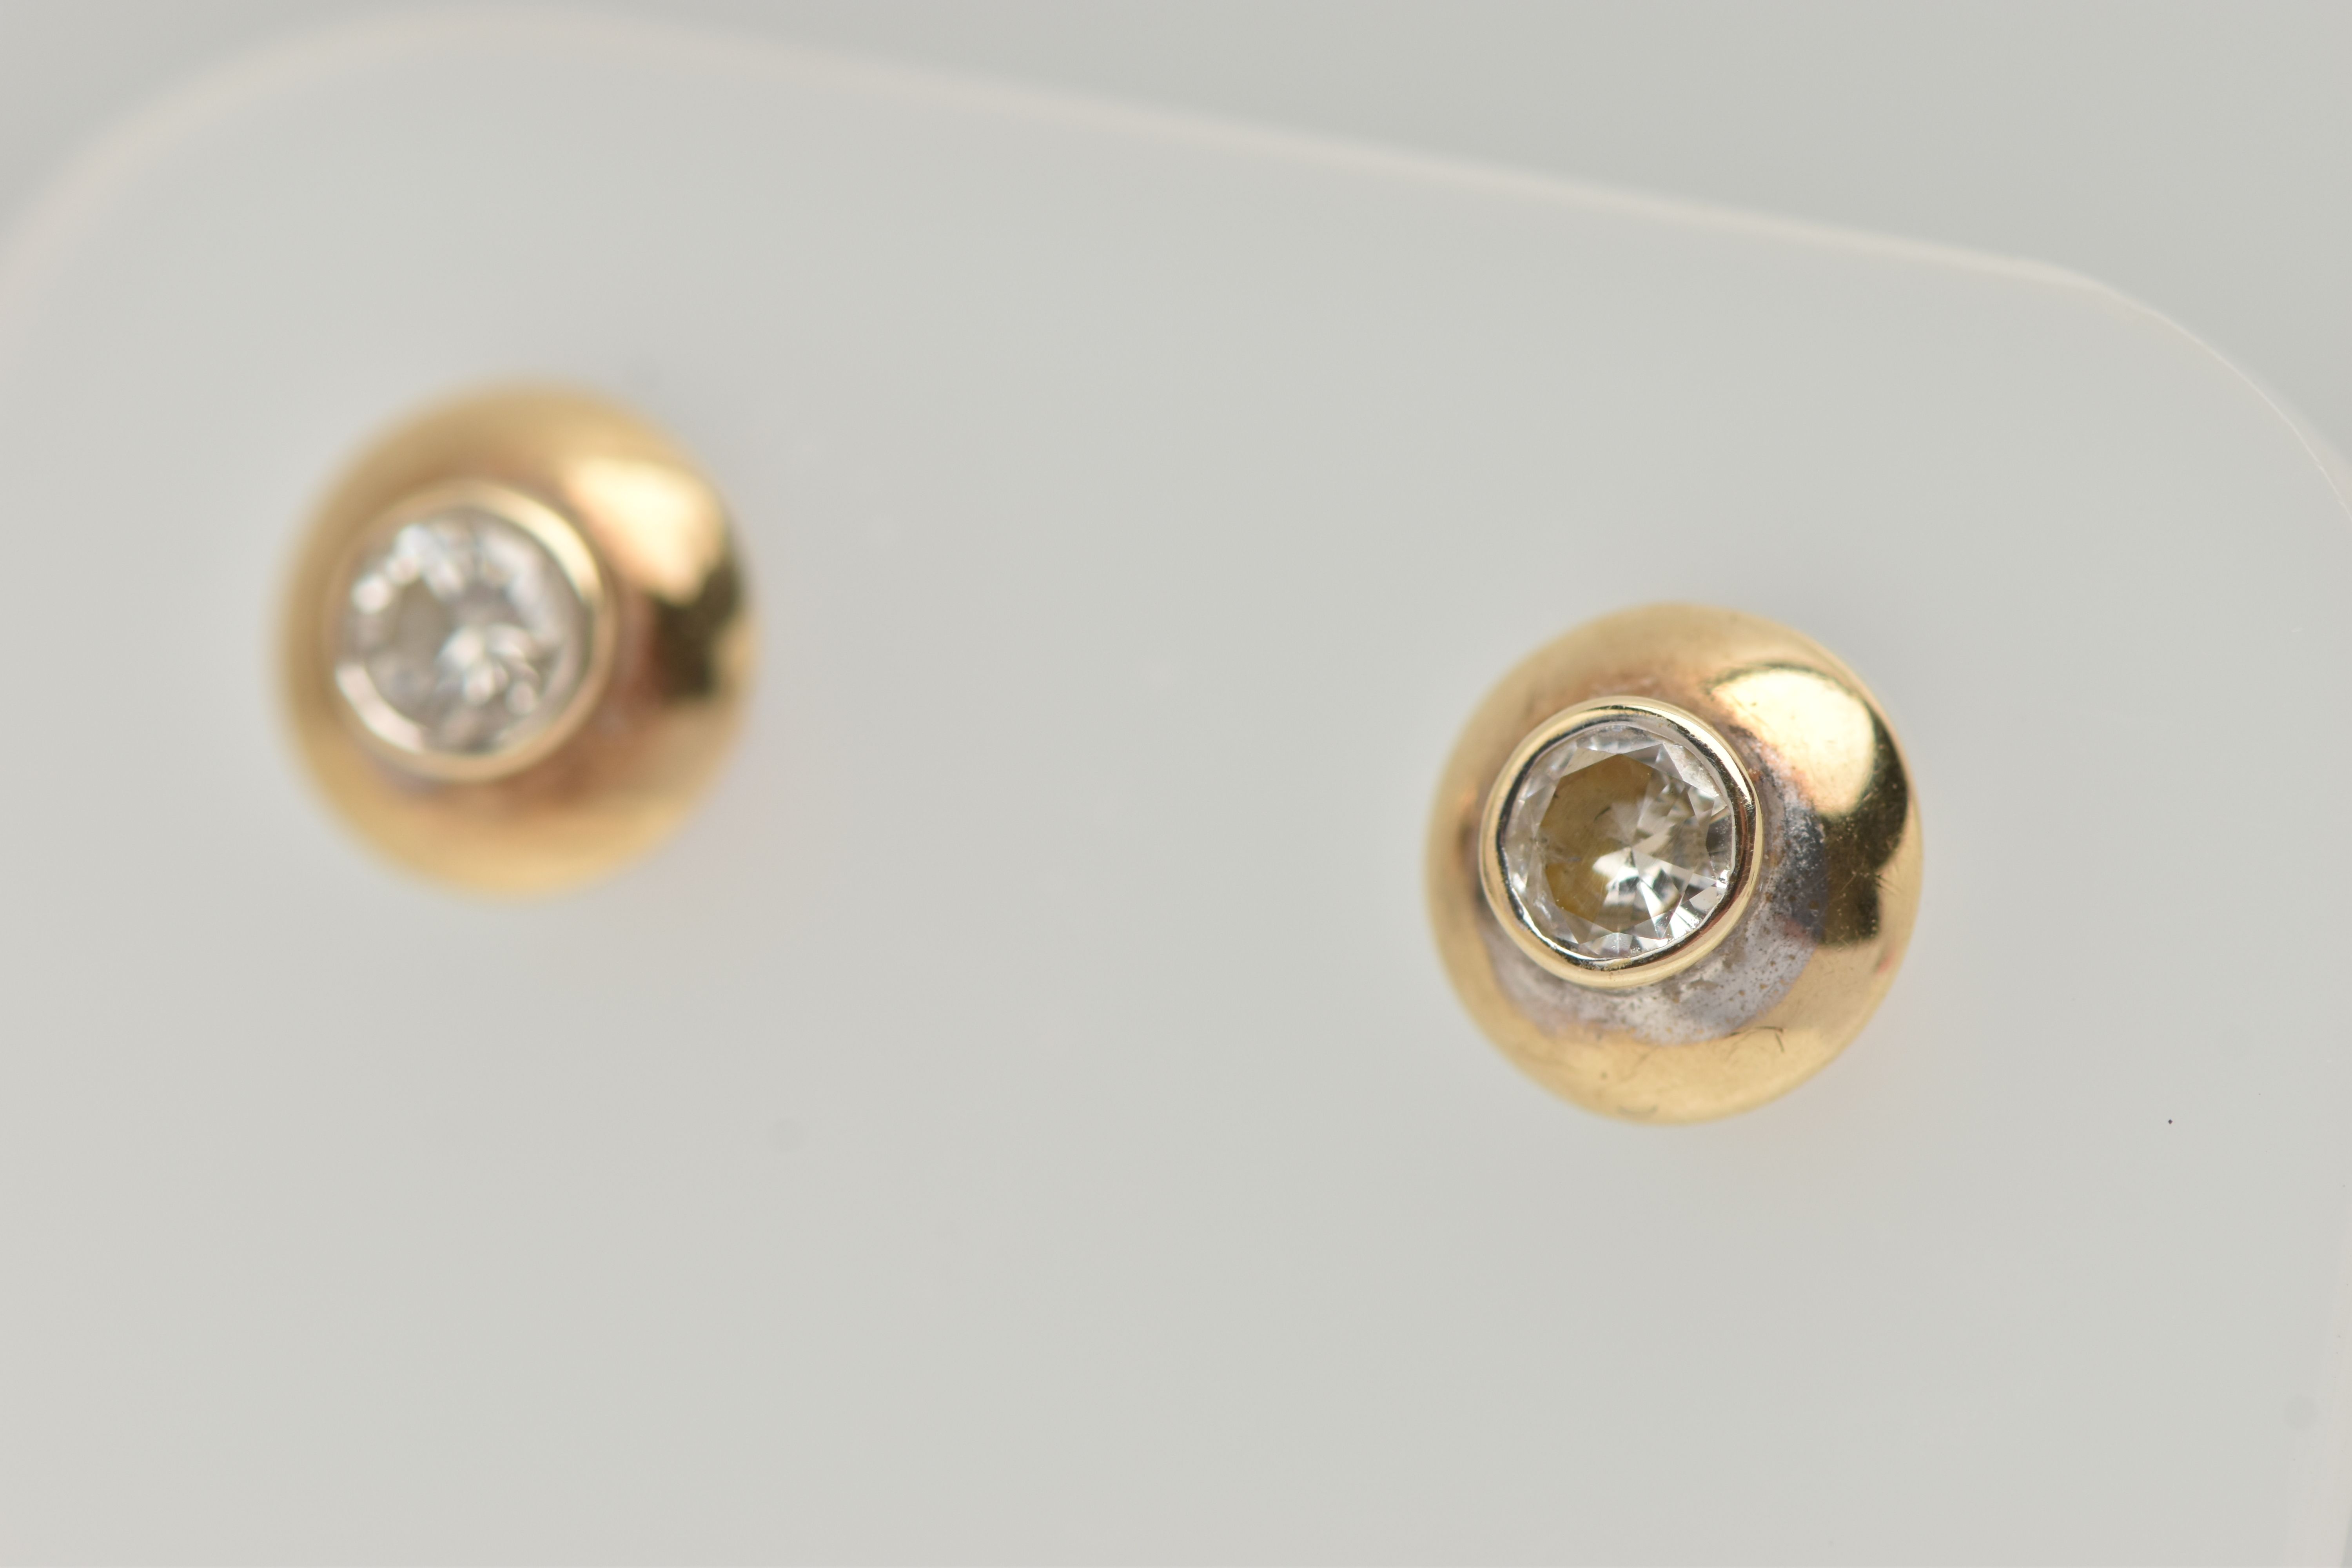 A PAIR OF 9CT GOLD DIAMOND SET EARRINGS, each earring set with a round brilliant cut diamond, collet - Image 3 of 4